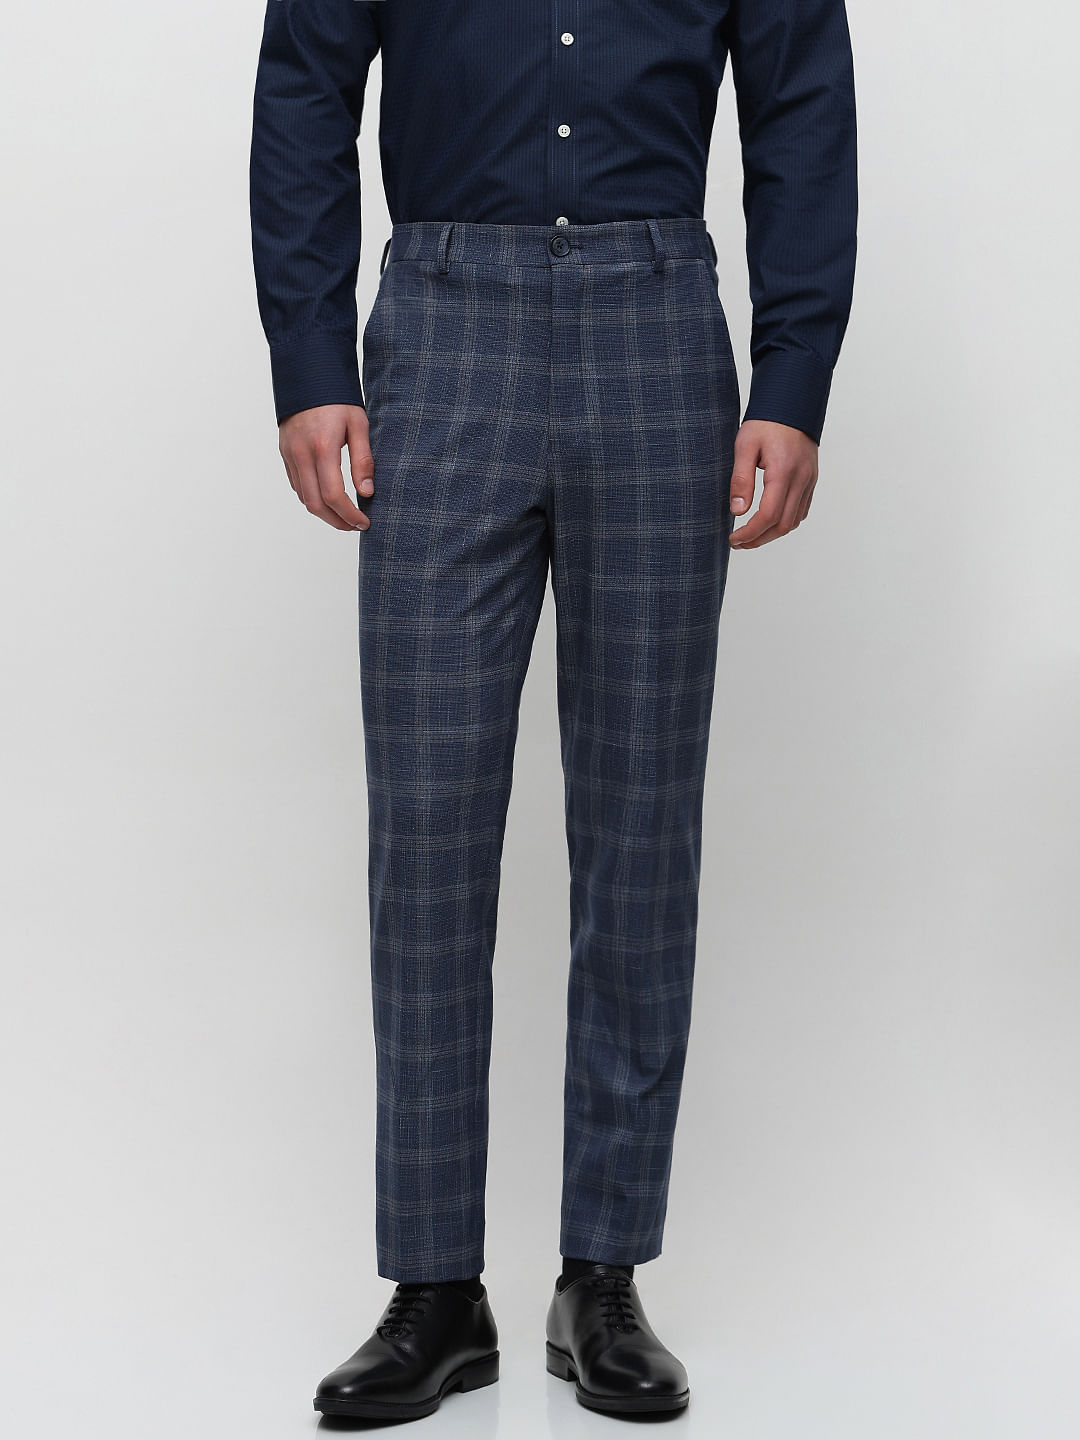 Tailored jersey trousers - Black/Dogtooth-patterned - Ladies | H&M IN